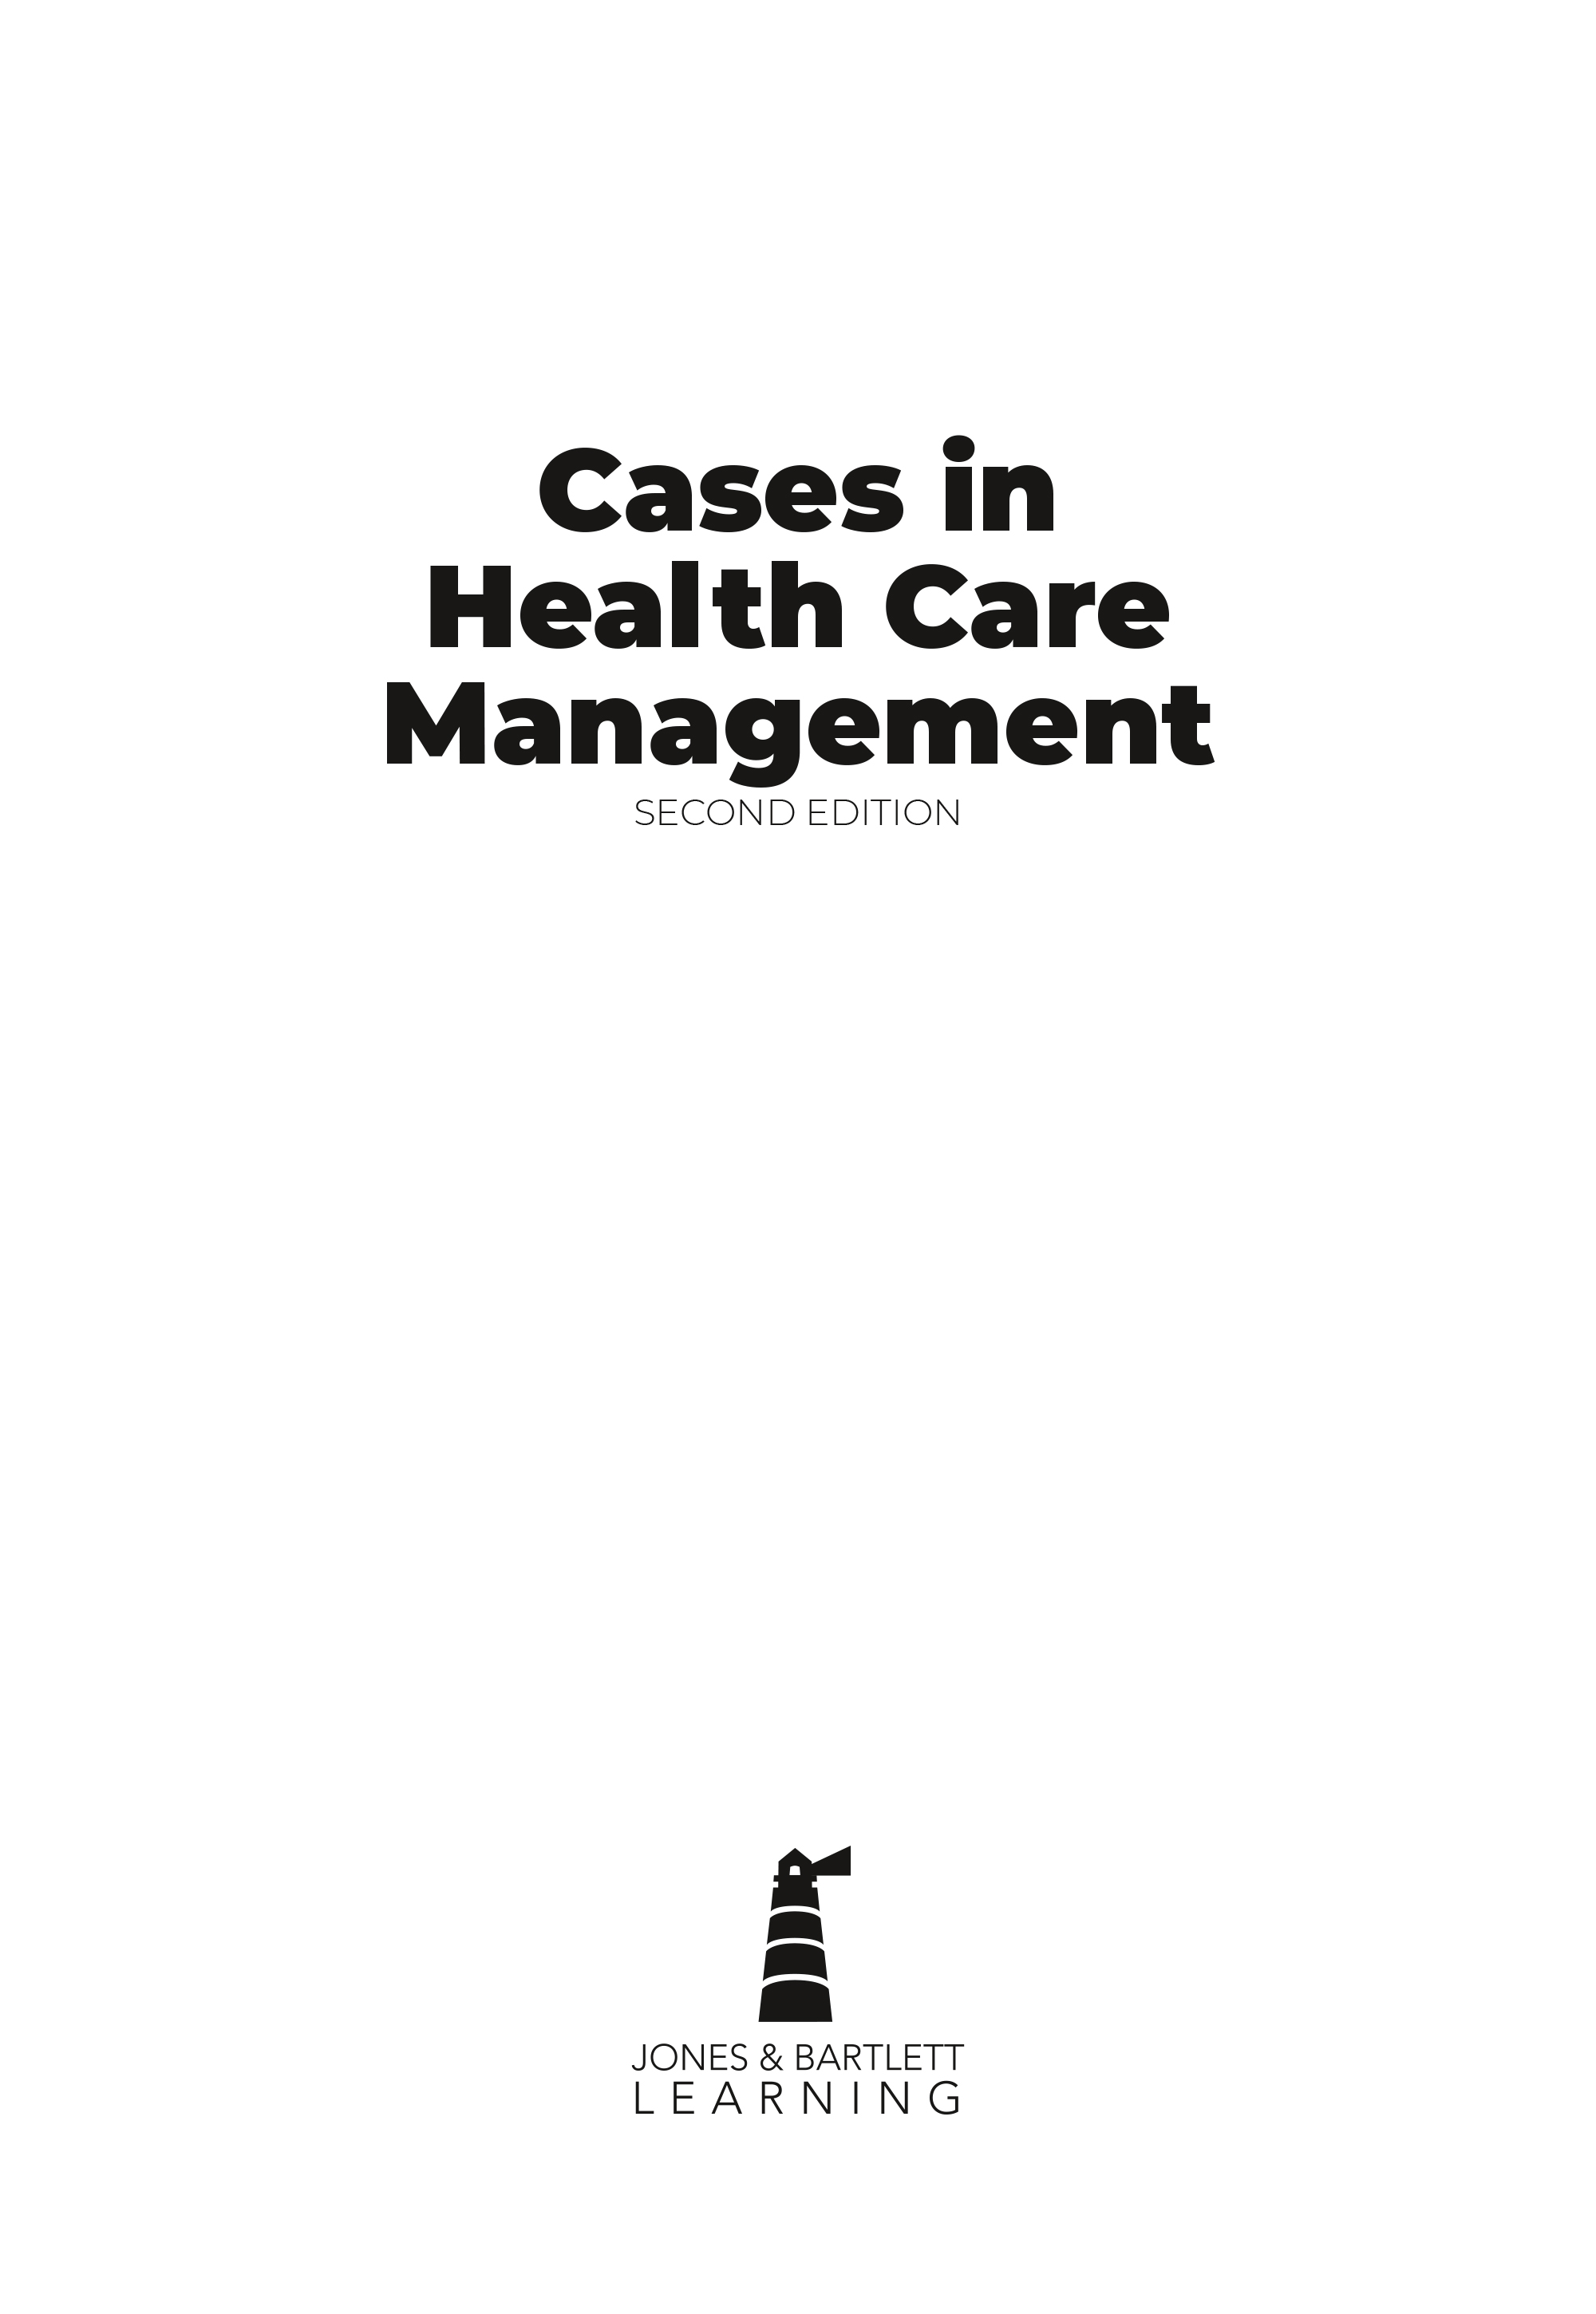 Cases in Health Care Management - image 2